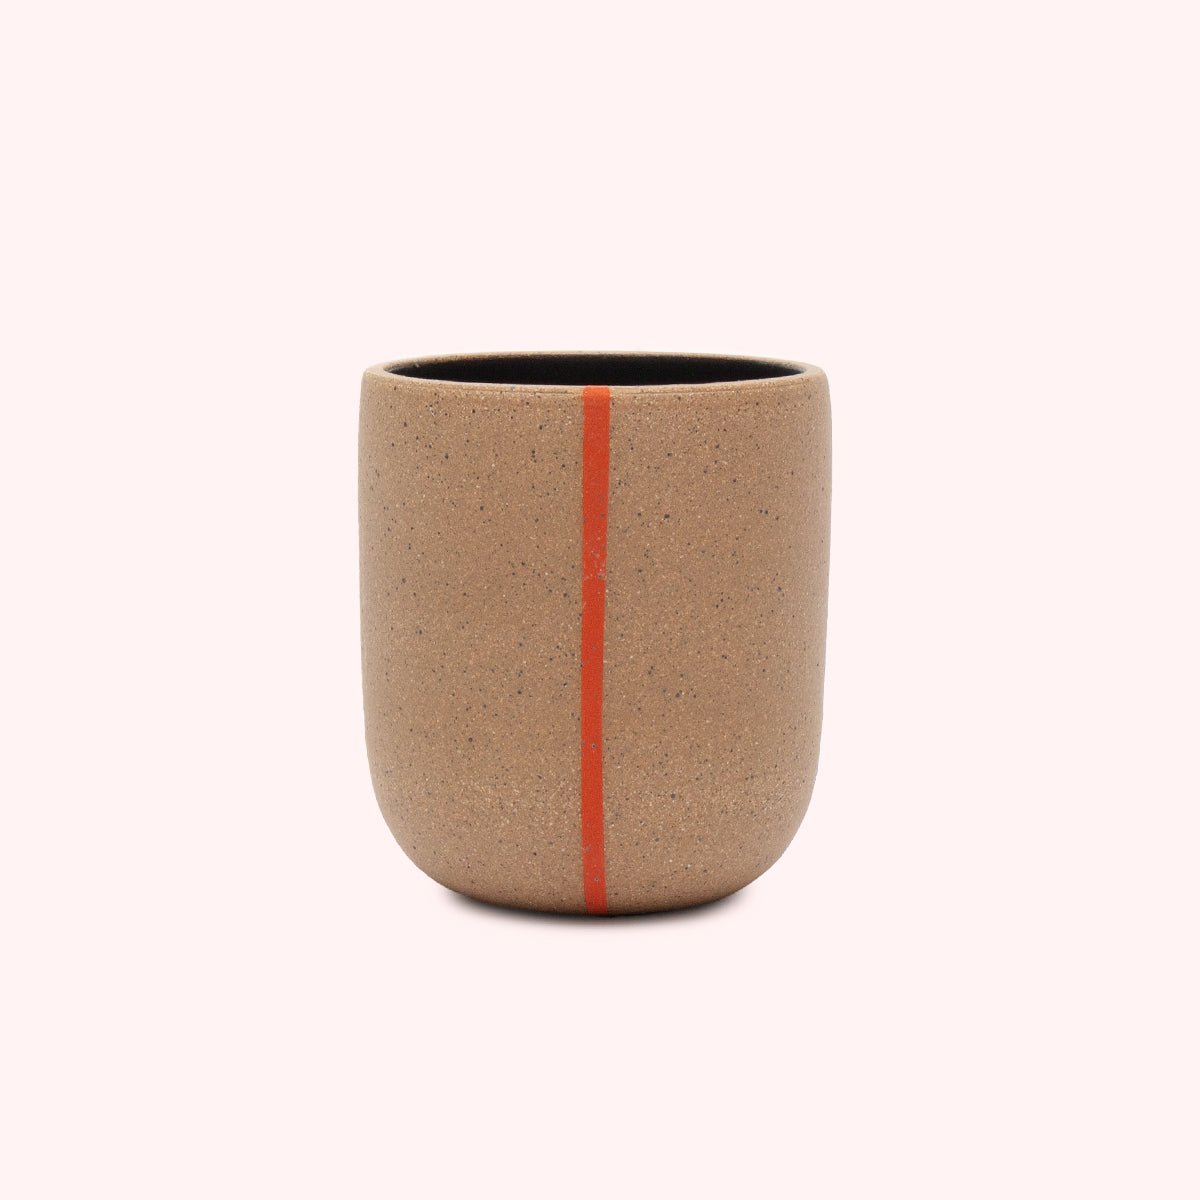 Speckled stoneware cup featuring a single red line and black interior satin glaze. Designed and hand thrown by Wolf Ceramics in Hood River, Oregon.